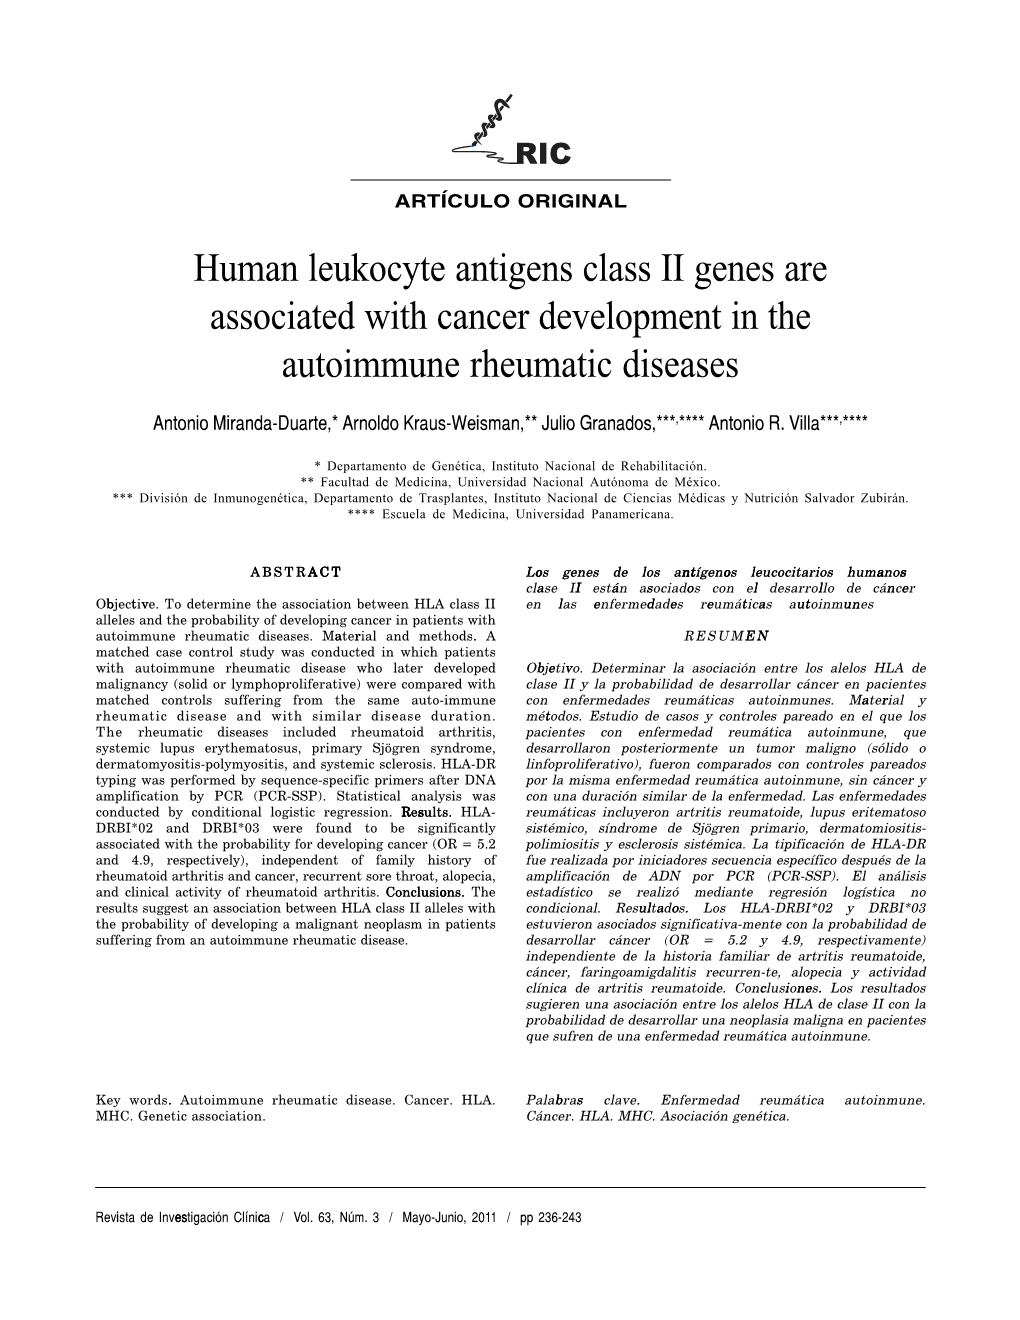 Human Leukocyte Antigens Class II Genes Are Associated with Cancer Development in the Autoimmune Rheumatic Diseases